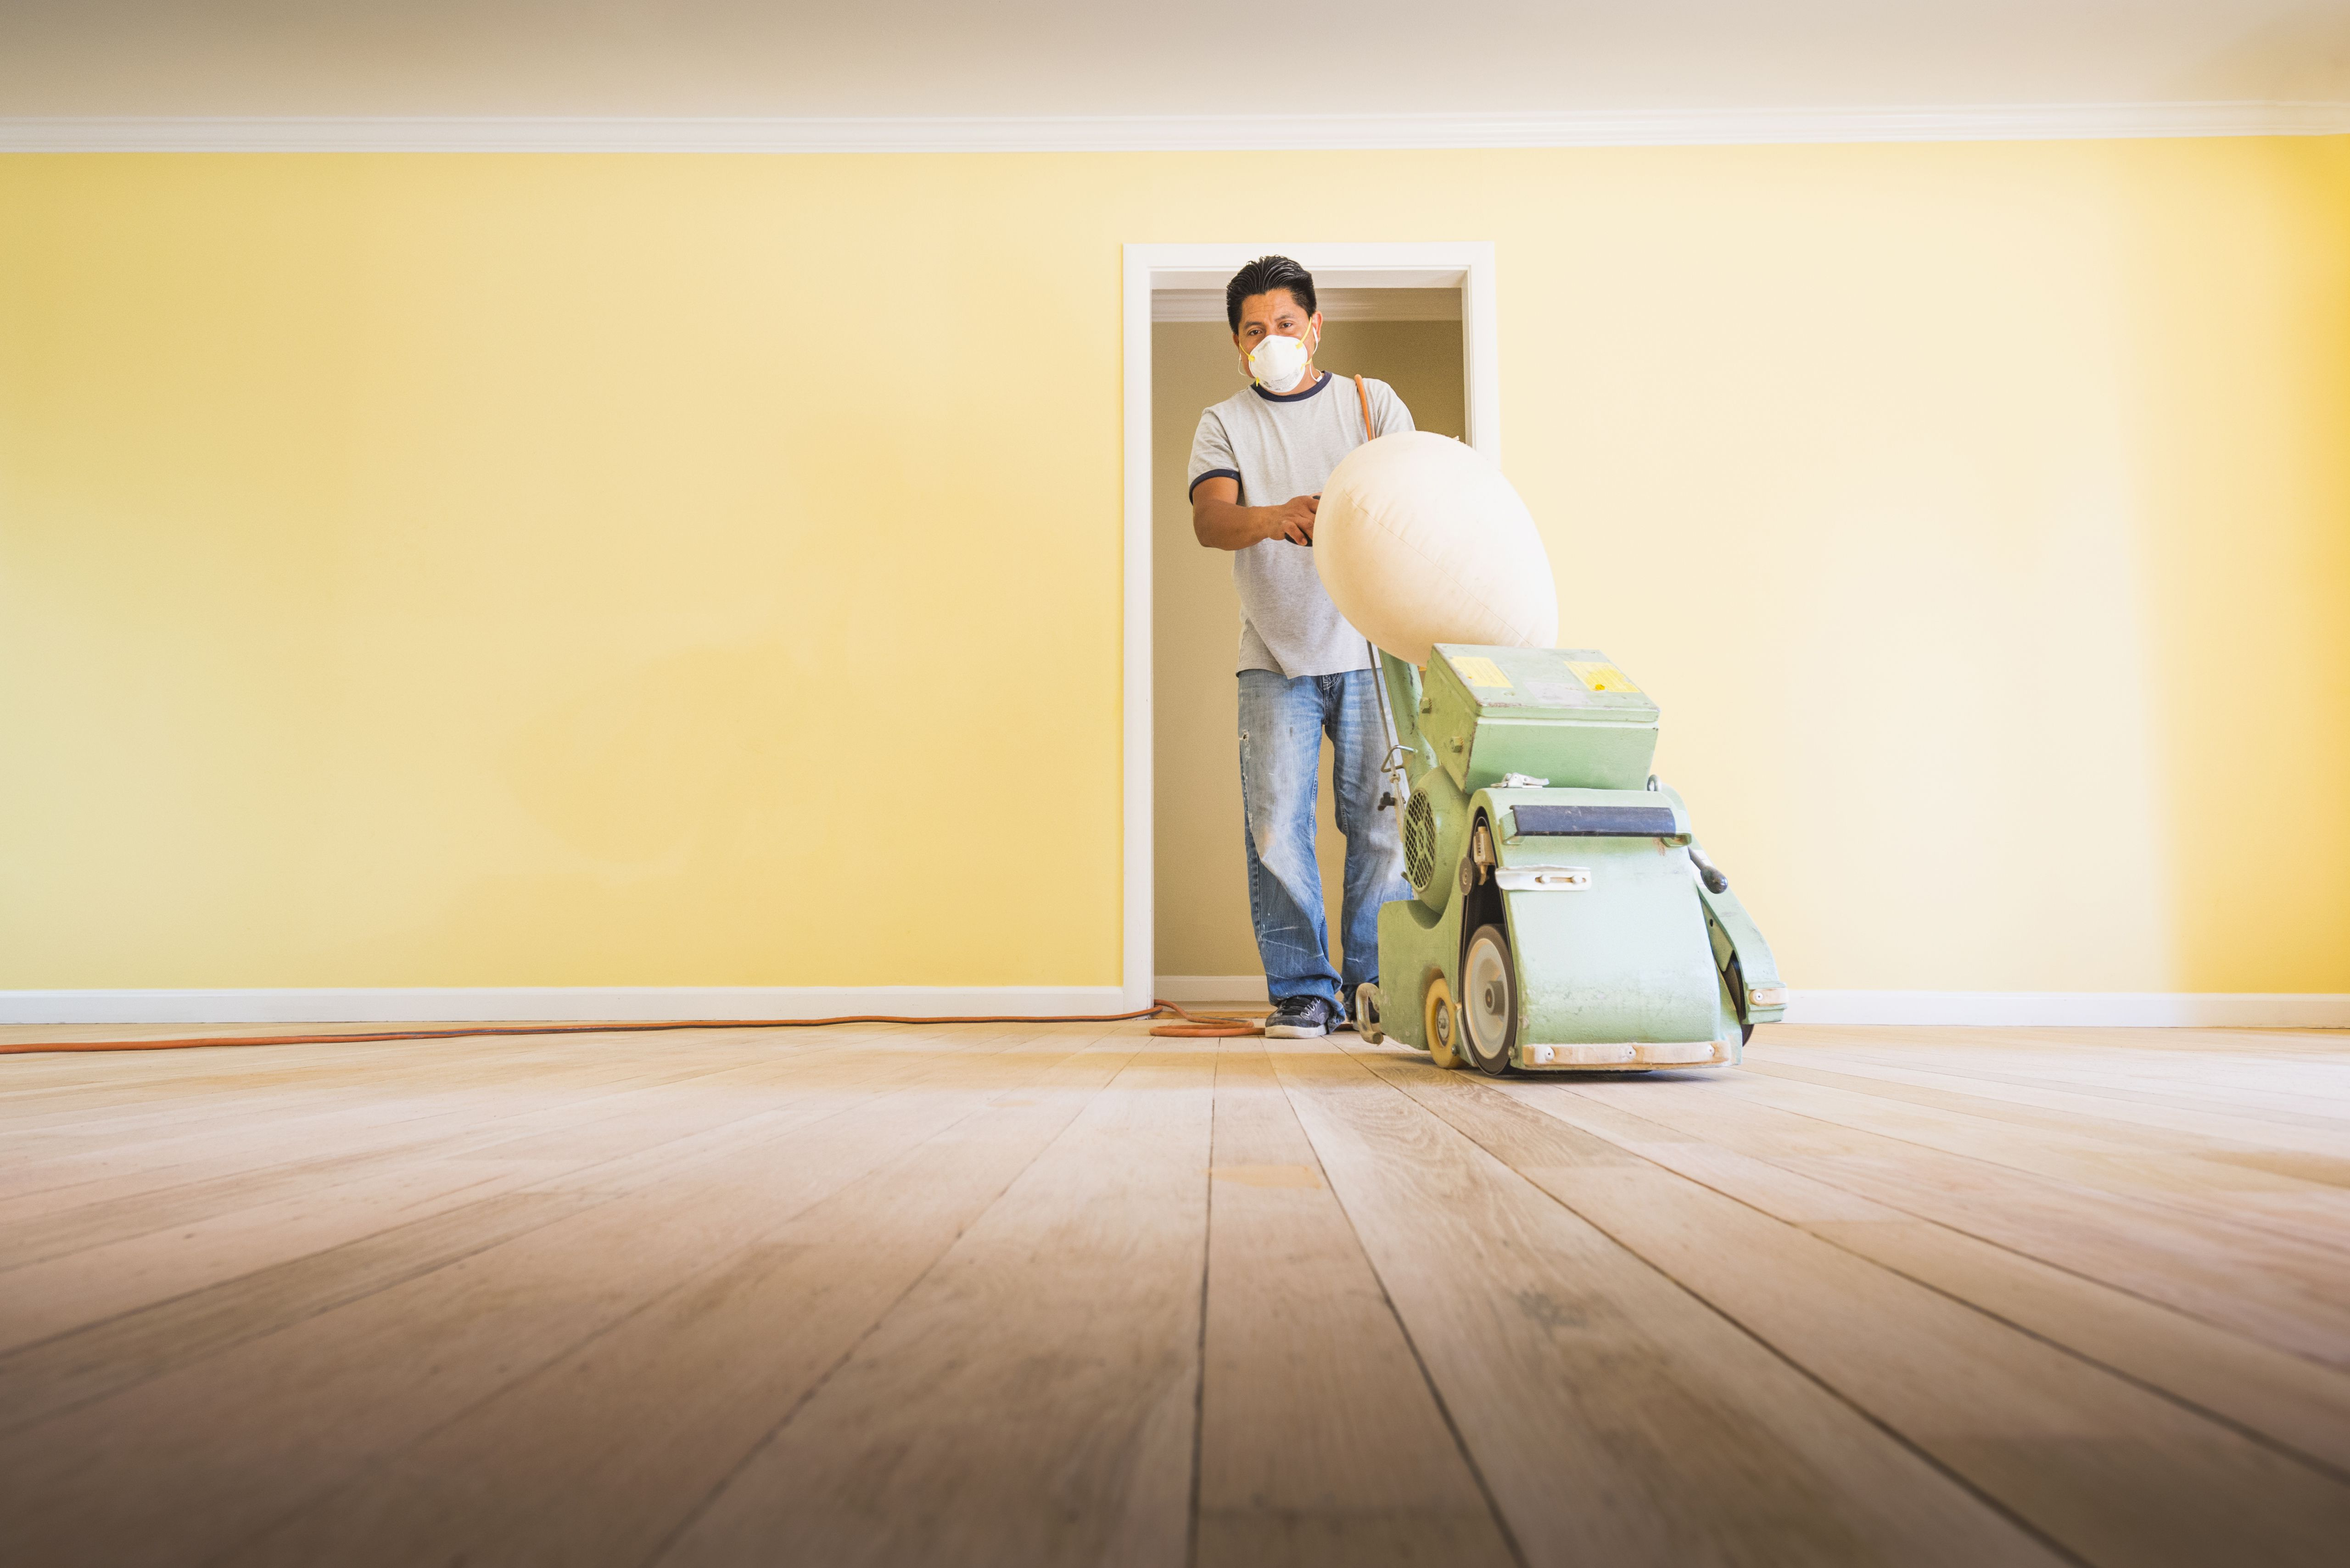 13 Popular Getting Paint Off Hardwood Floors 2024 free download getting paint off hardwood floors of should you paint walls or refinish floors first intended for floorsandingafterpainting 5a8f08dfae9ab80037d9d878